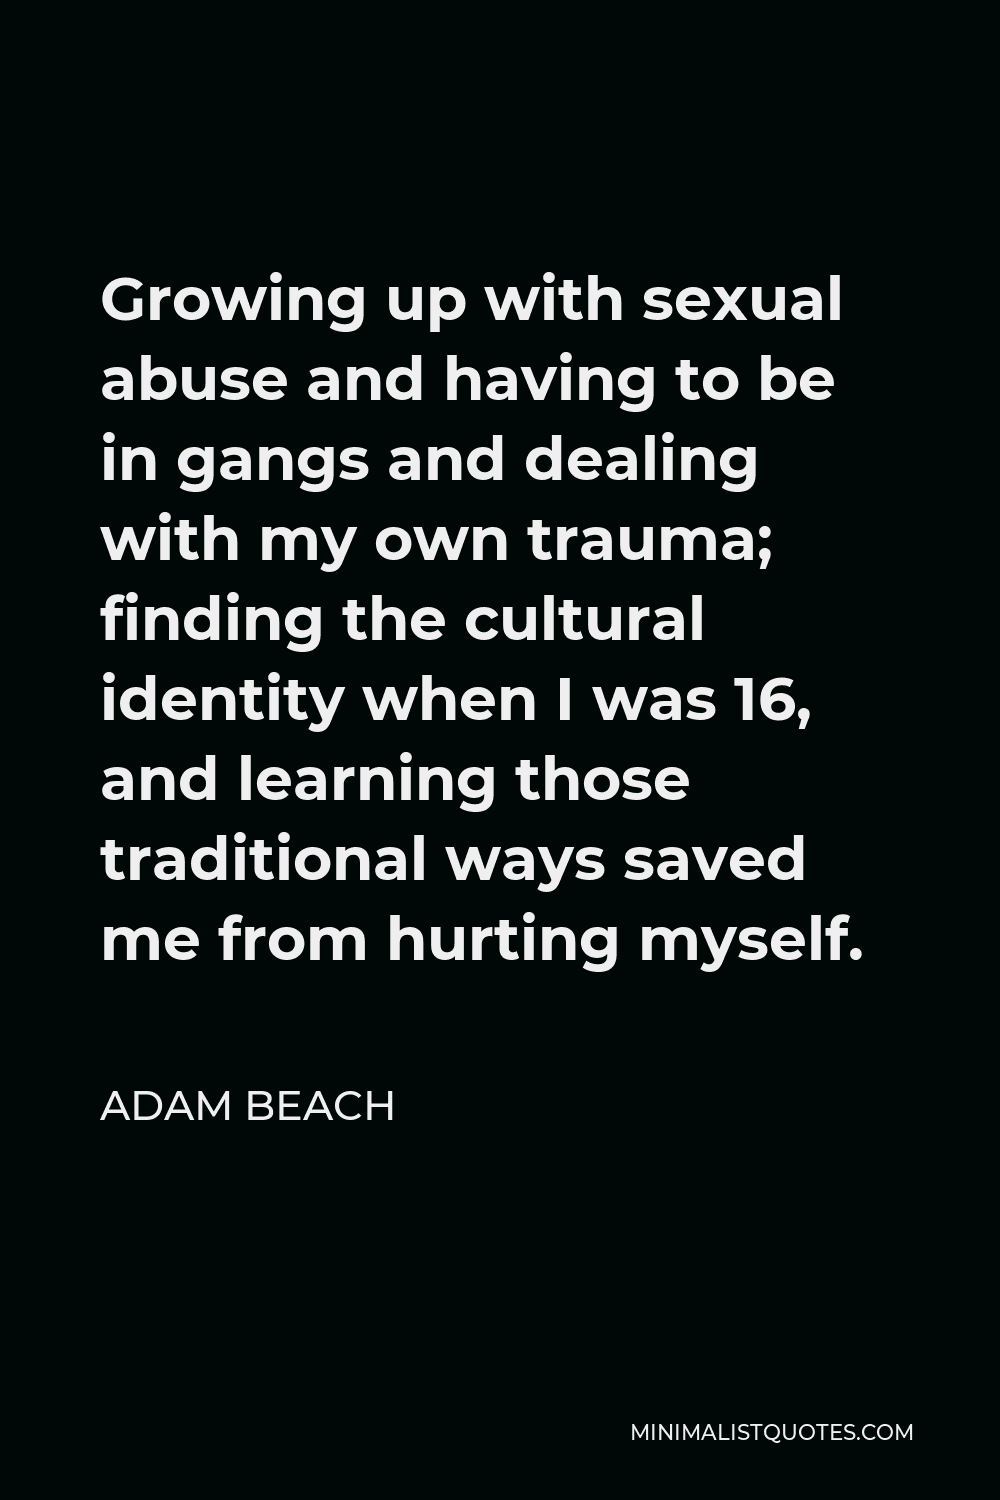 Adam Beach Quote - Growing up with sexual abuse and having to be in gangs and dealing with my own trauma; finding the cultural identity when I was 16, and learning those traditional ways saved me from hurting myself.